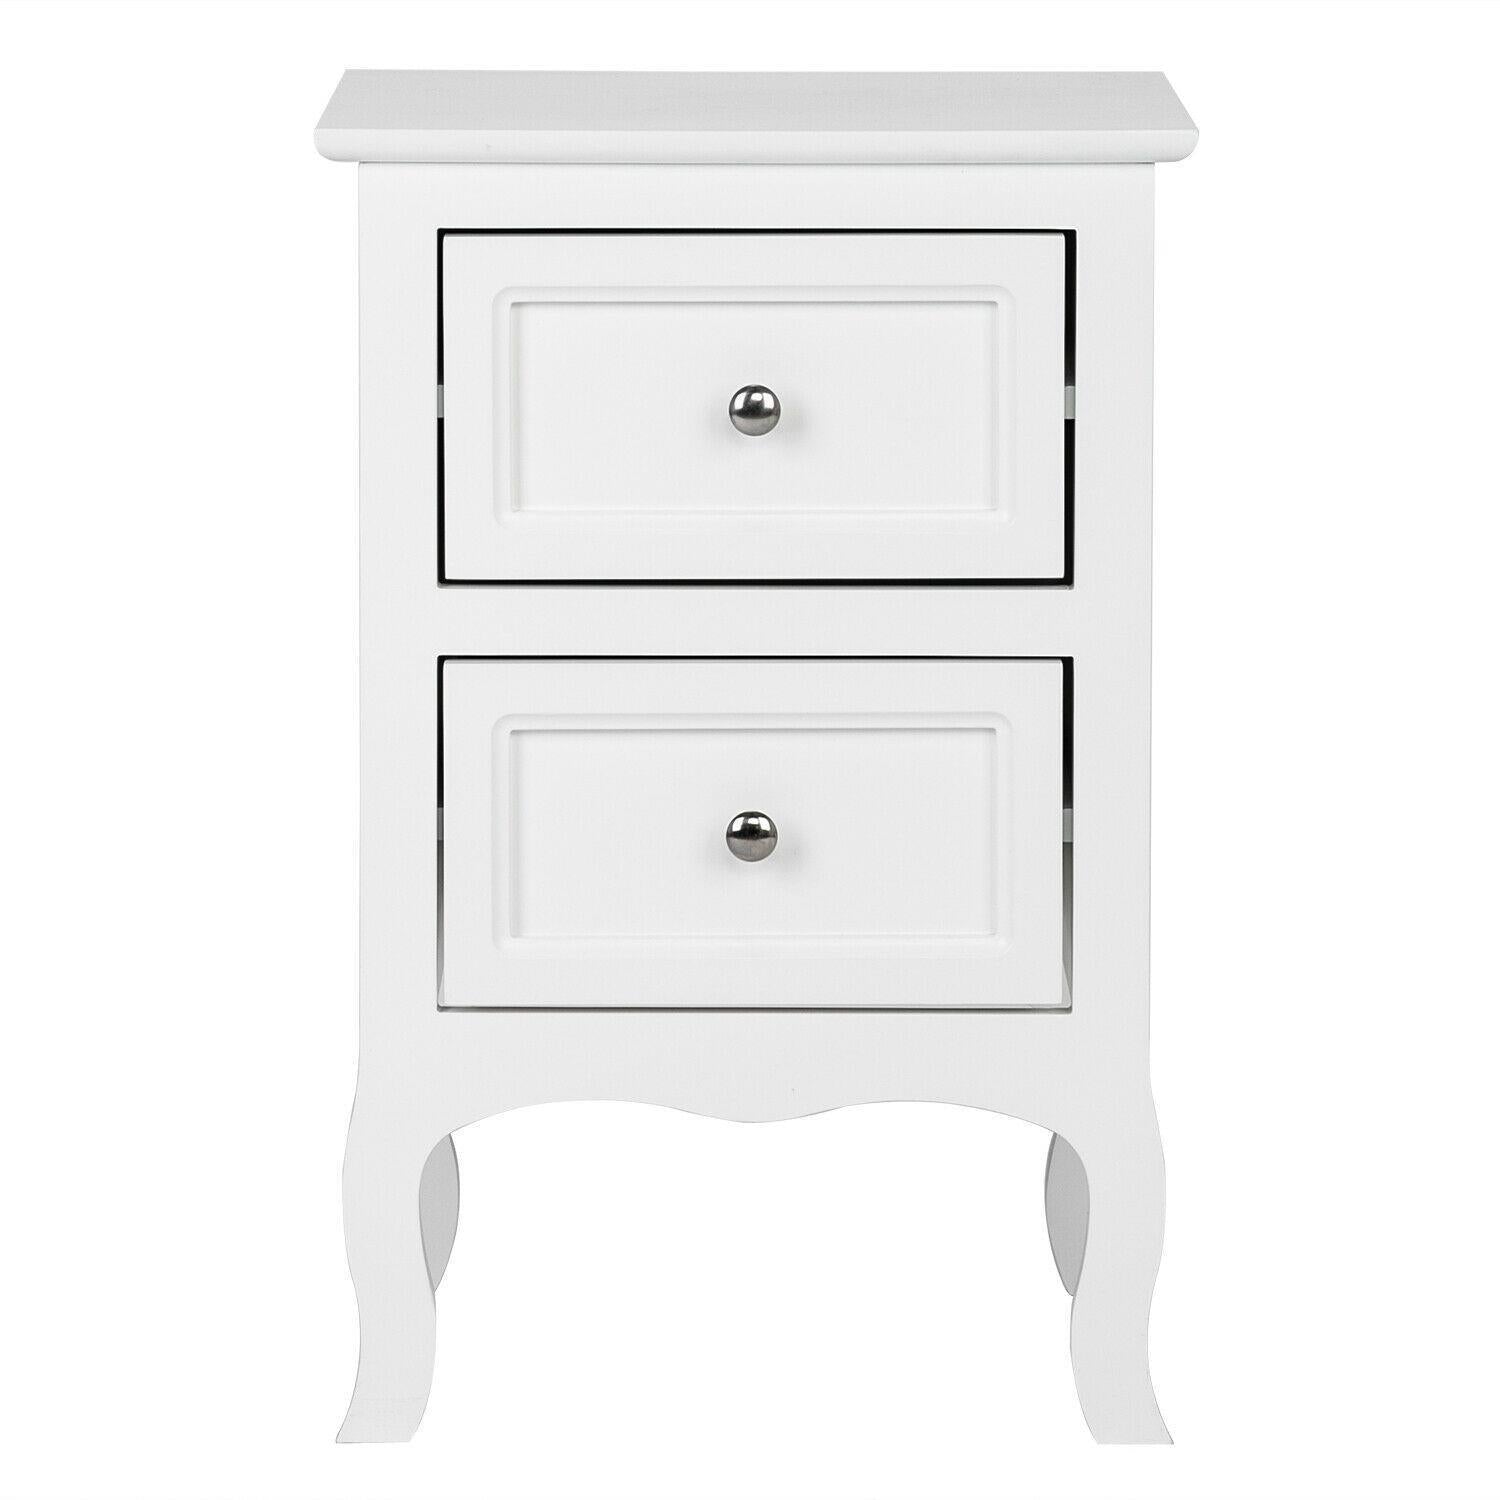 End Tables - Wood End Table Modern Nightstand - 2 Drawers - Bedroom Organizer - Set Of 1 White